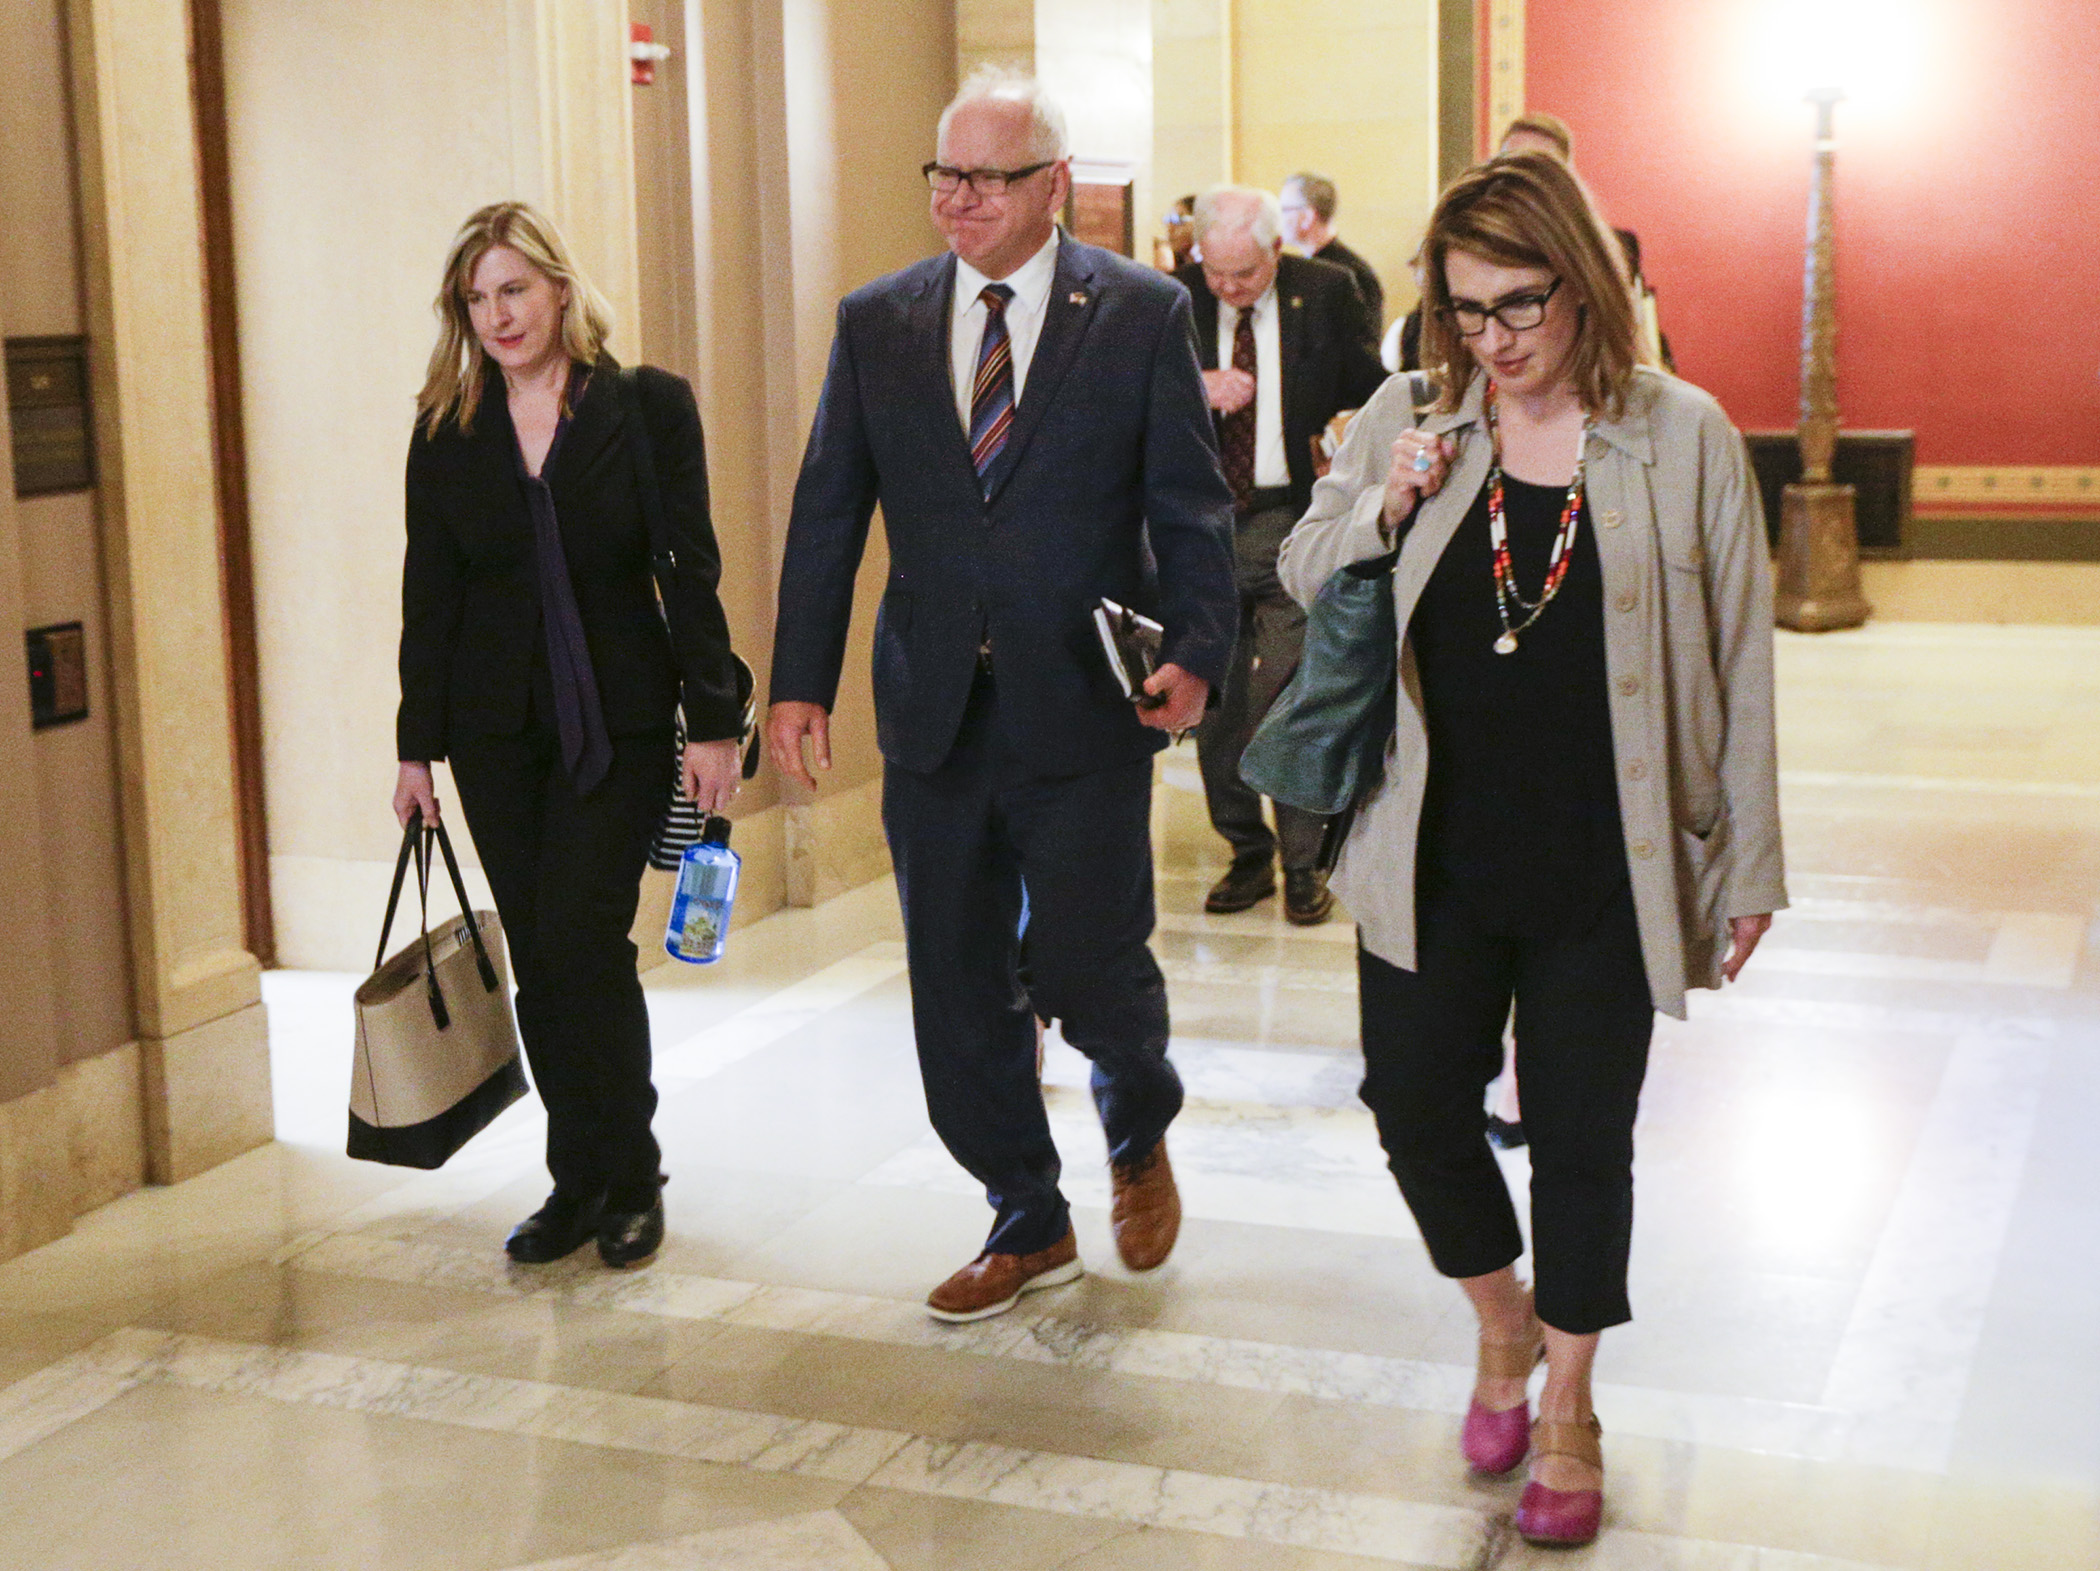 House Speaker Melissa Hortman, left, Gov. Tim Walz, and Lt. Gov. Peggy Flanagan head in for budget talks in the early afternoon May 16. Photo by Paul Battaglia